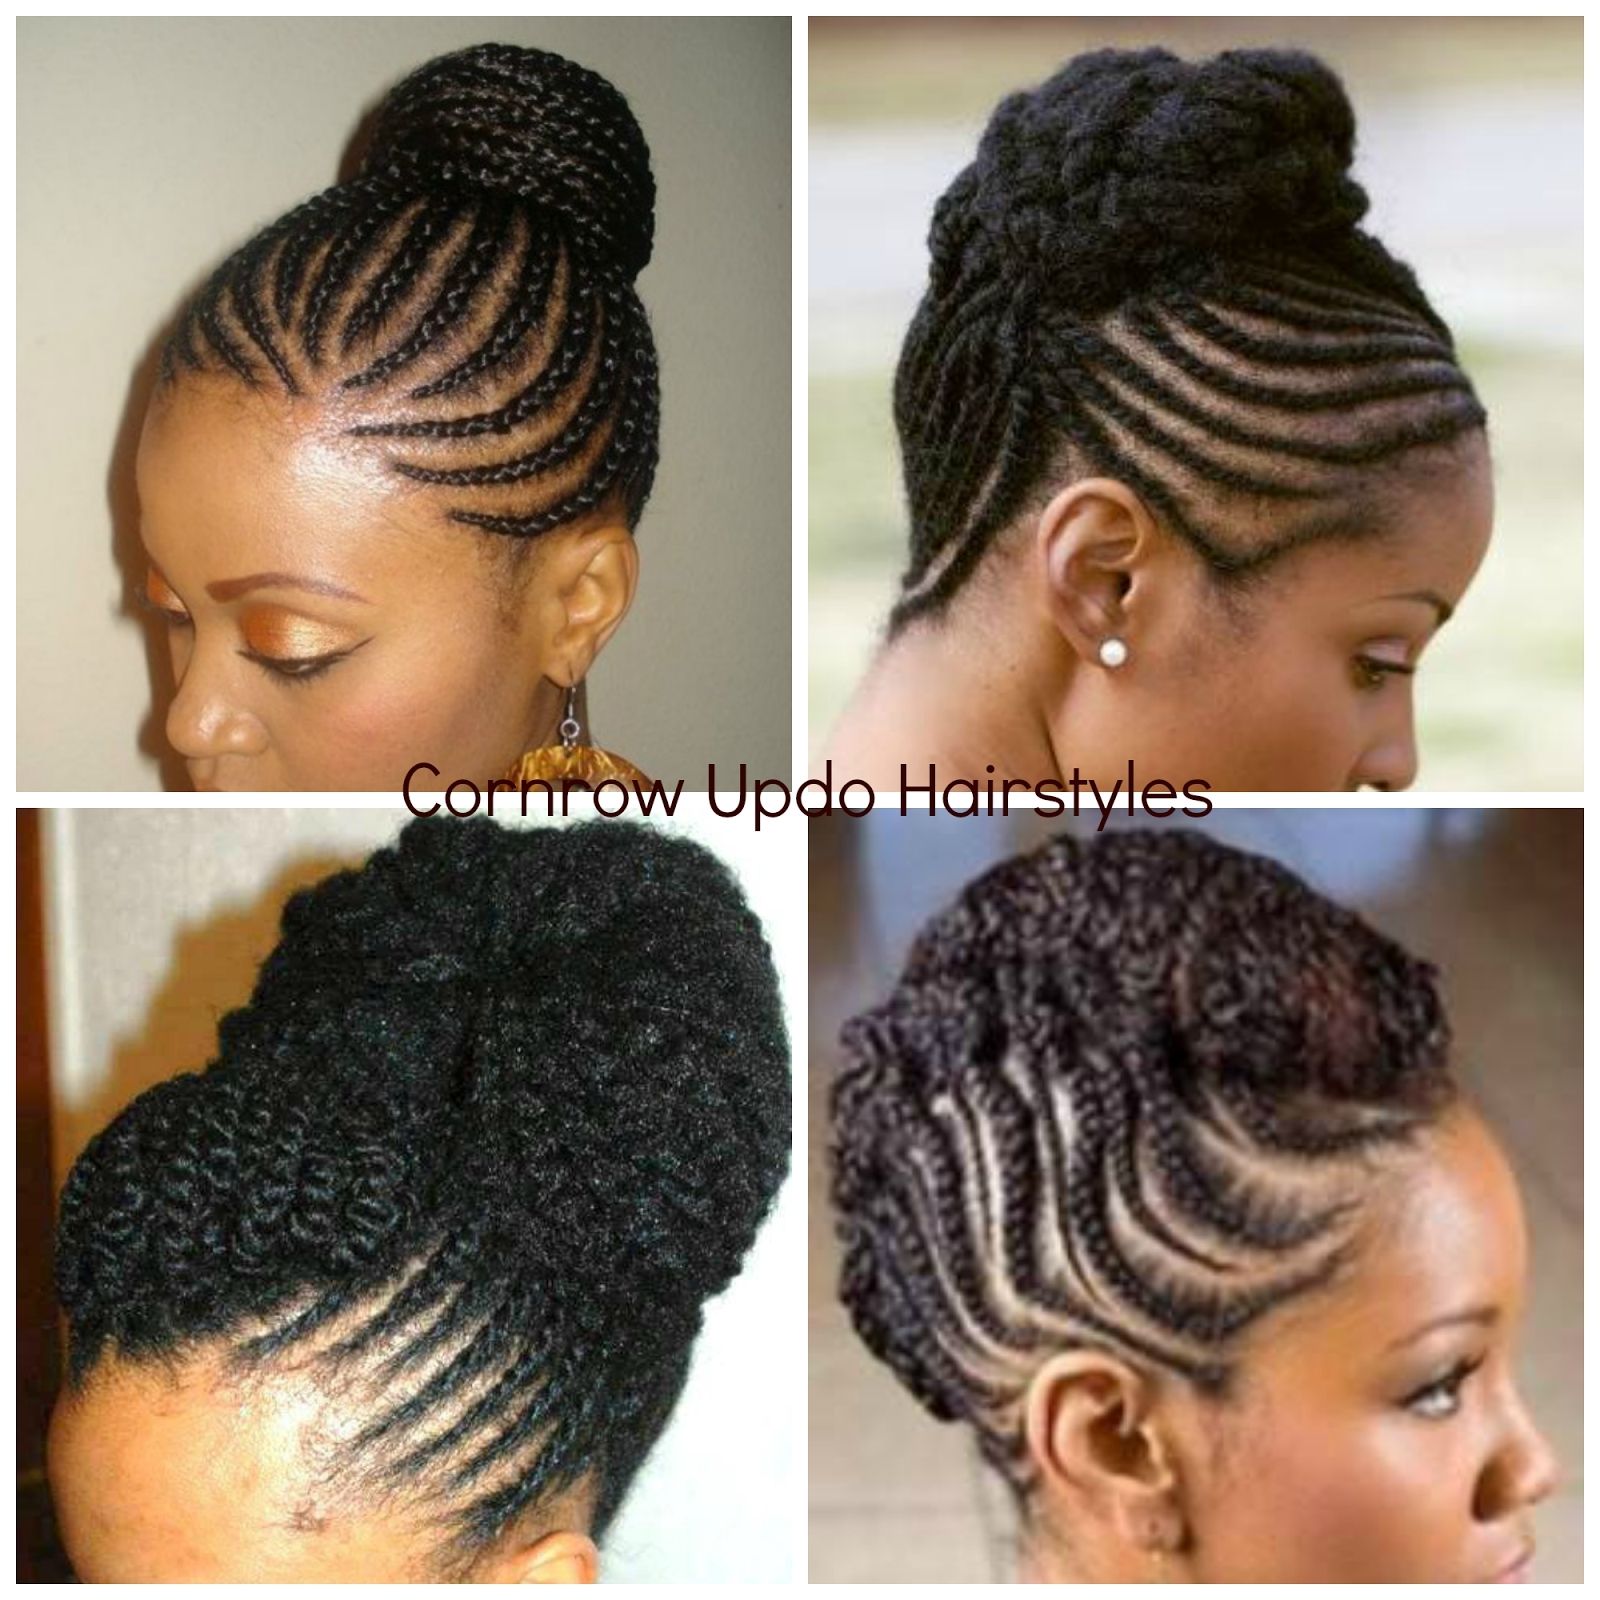 Photo: African American Cornrow Updo Hairstyles Cornrow Hairstyles Throughout Cornrow Updo Hairstyles For Black Women (View 3 of 15)